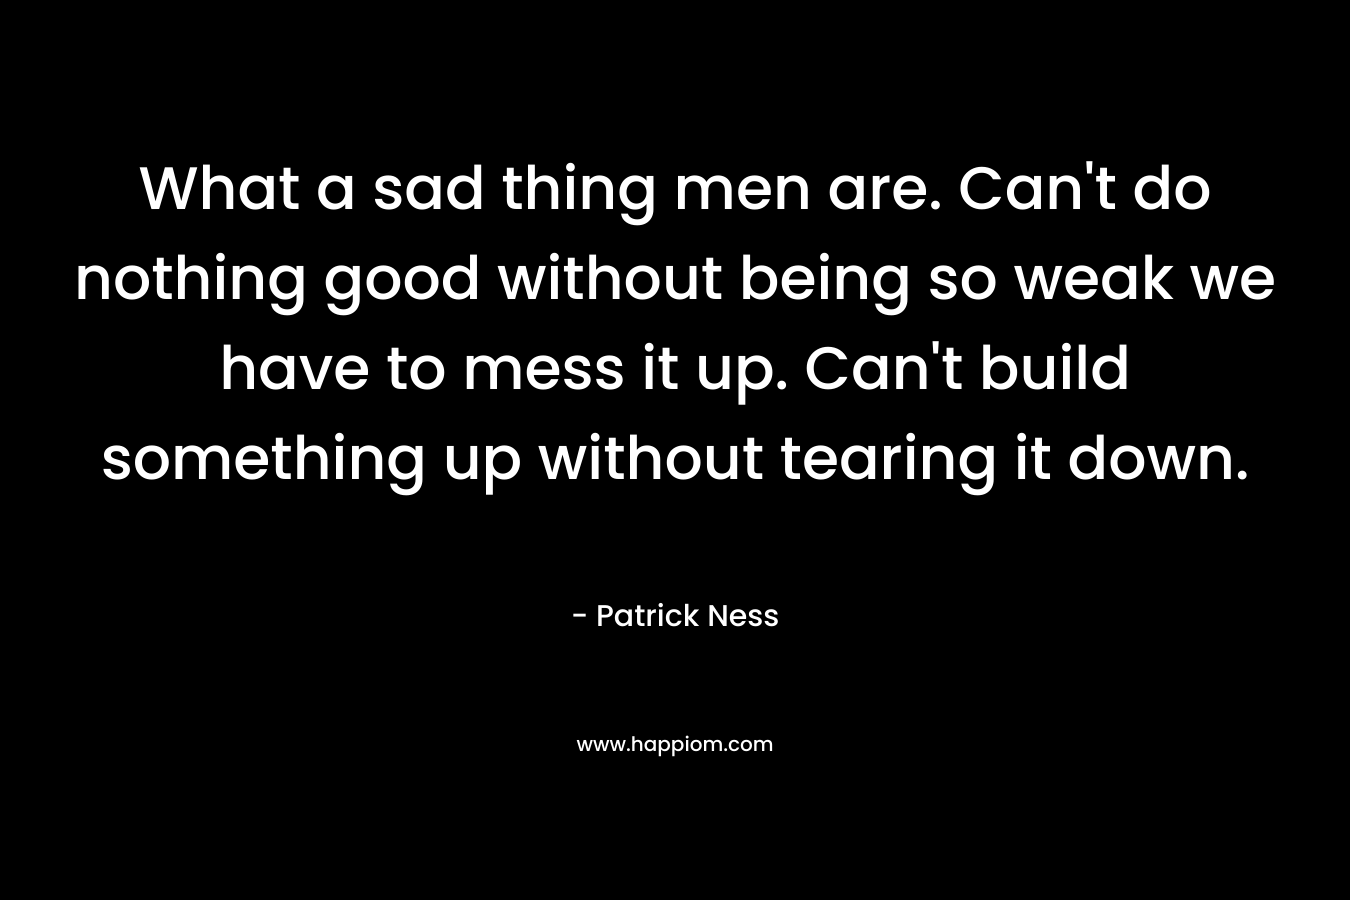 What a sad thing men are. Can’t do nothing good without being so weak we have to mess it up. Can’t build something up without tearing it down. – Patrick Ness